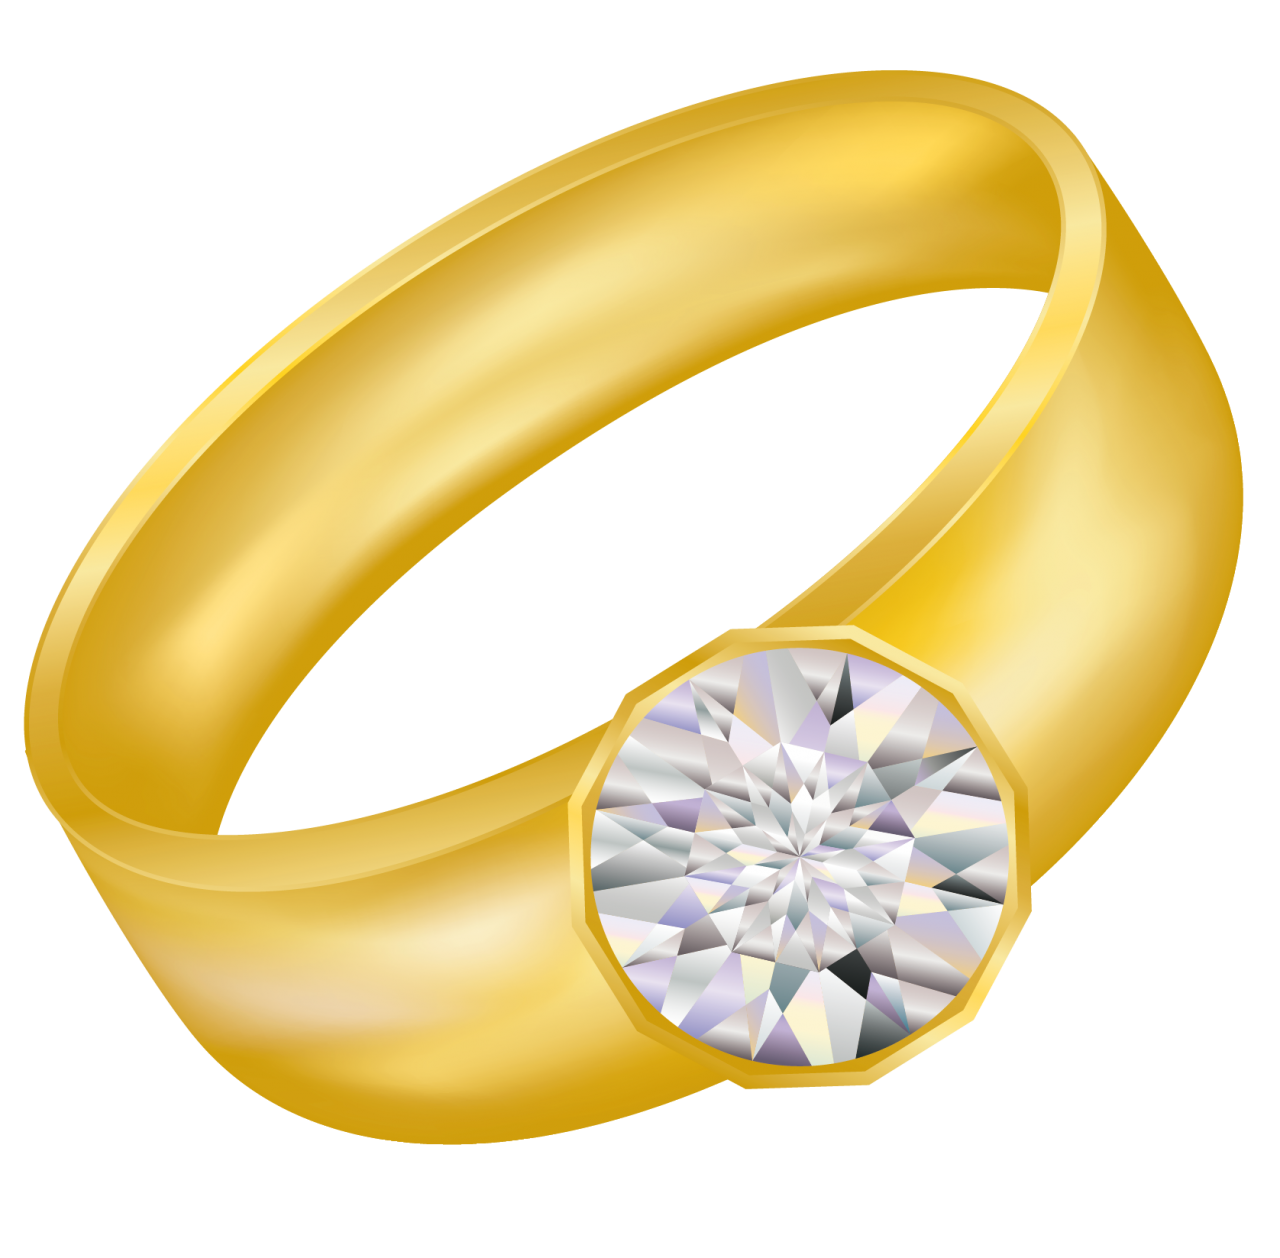 Gold Ring With Diamond PNG Image - PurePNG | Free transparent CC0 PNG ...